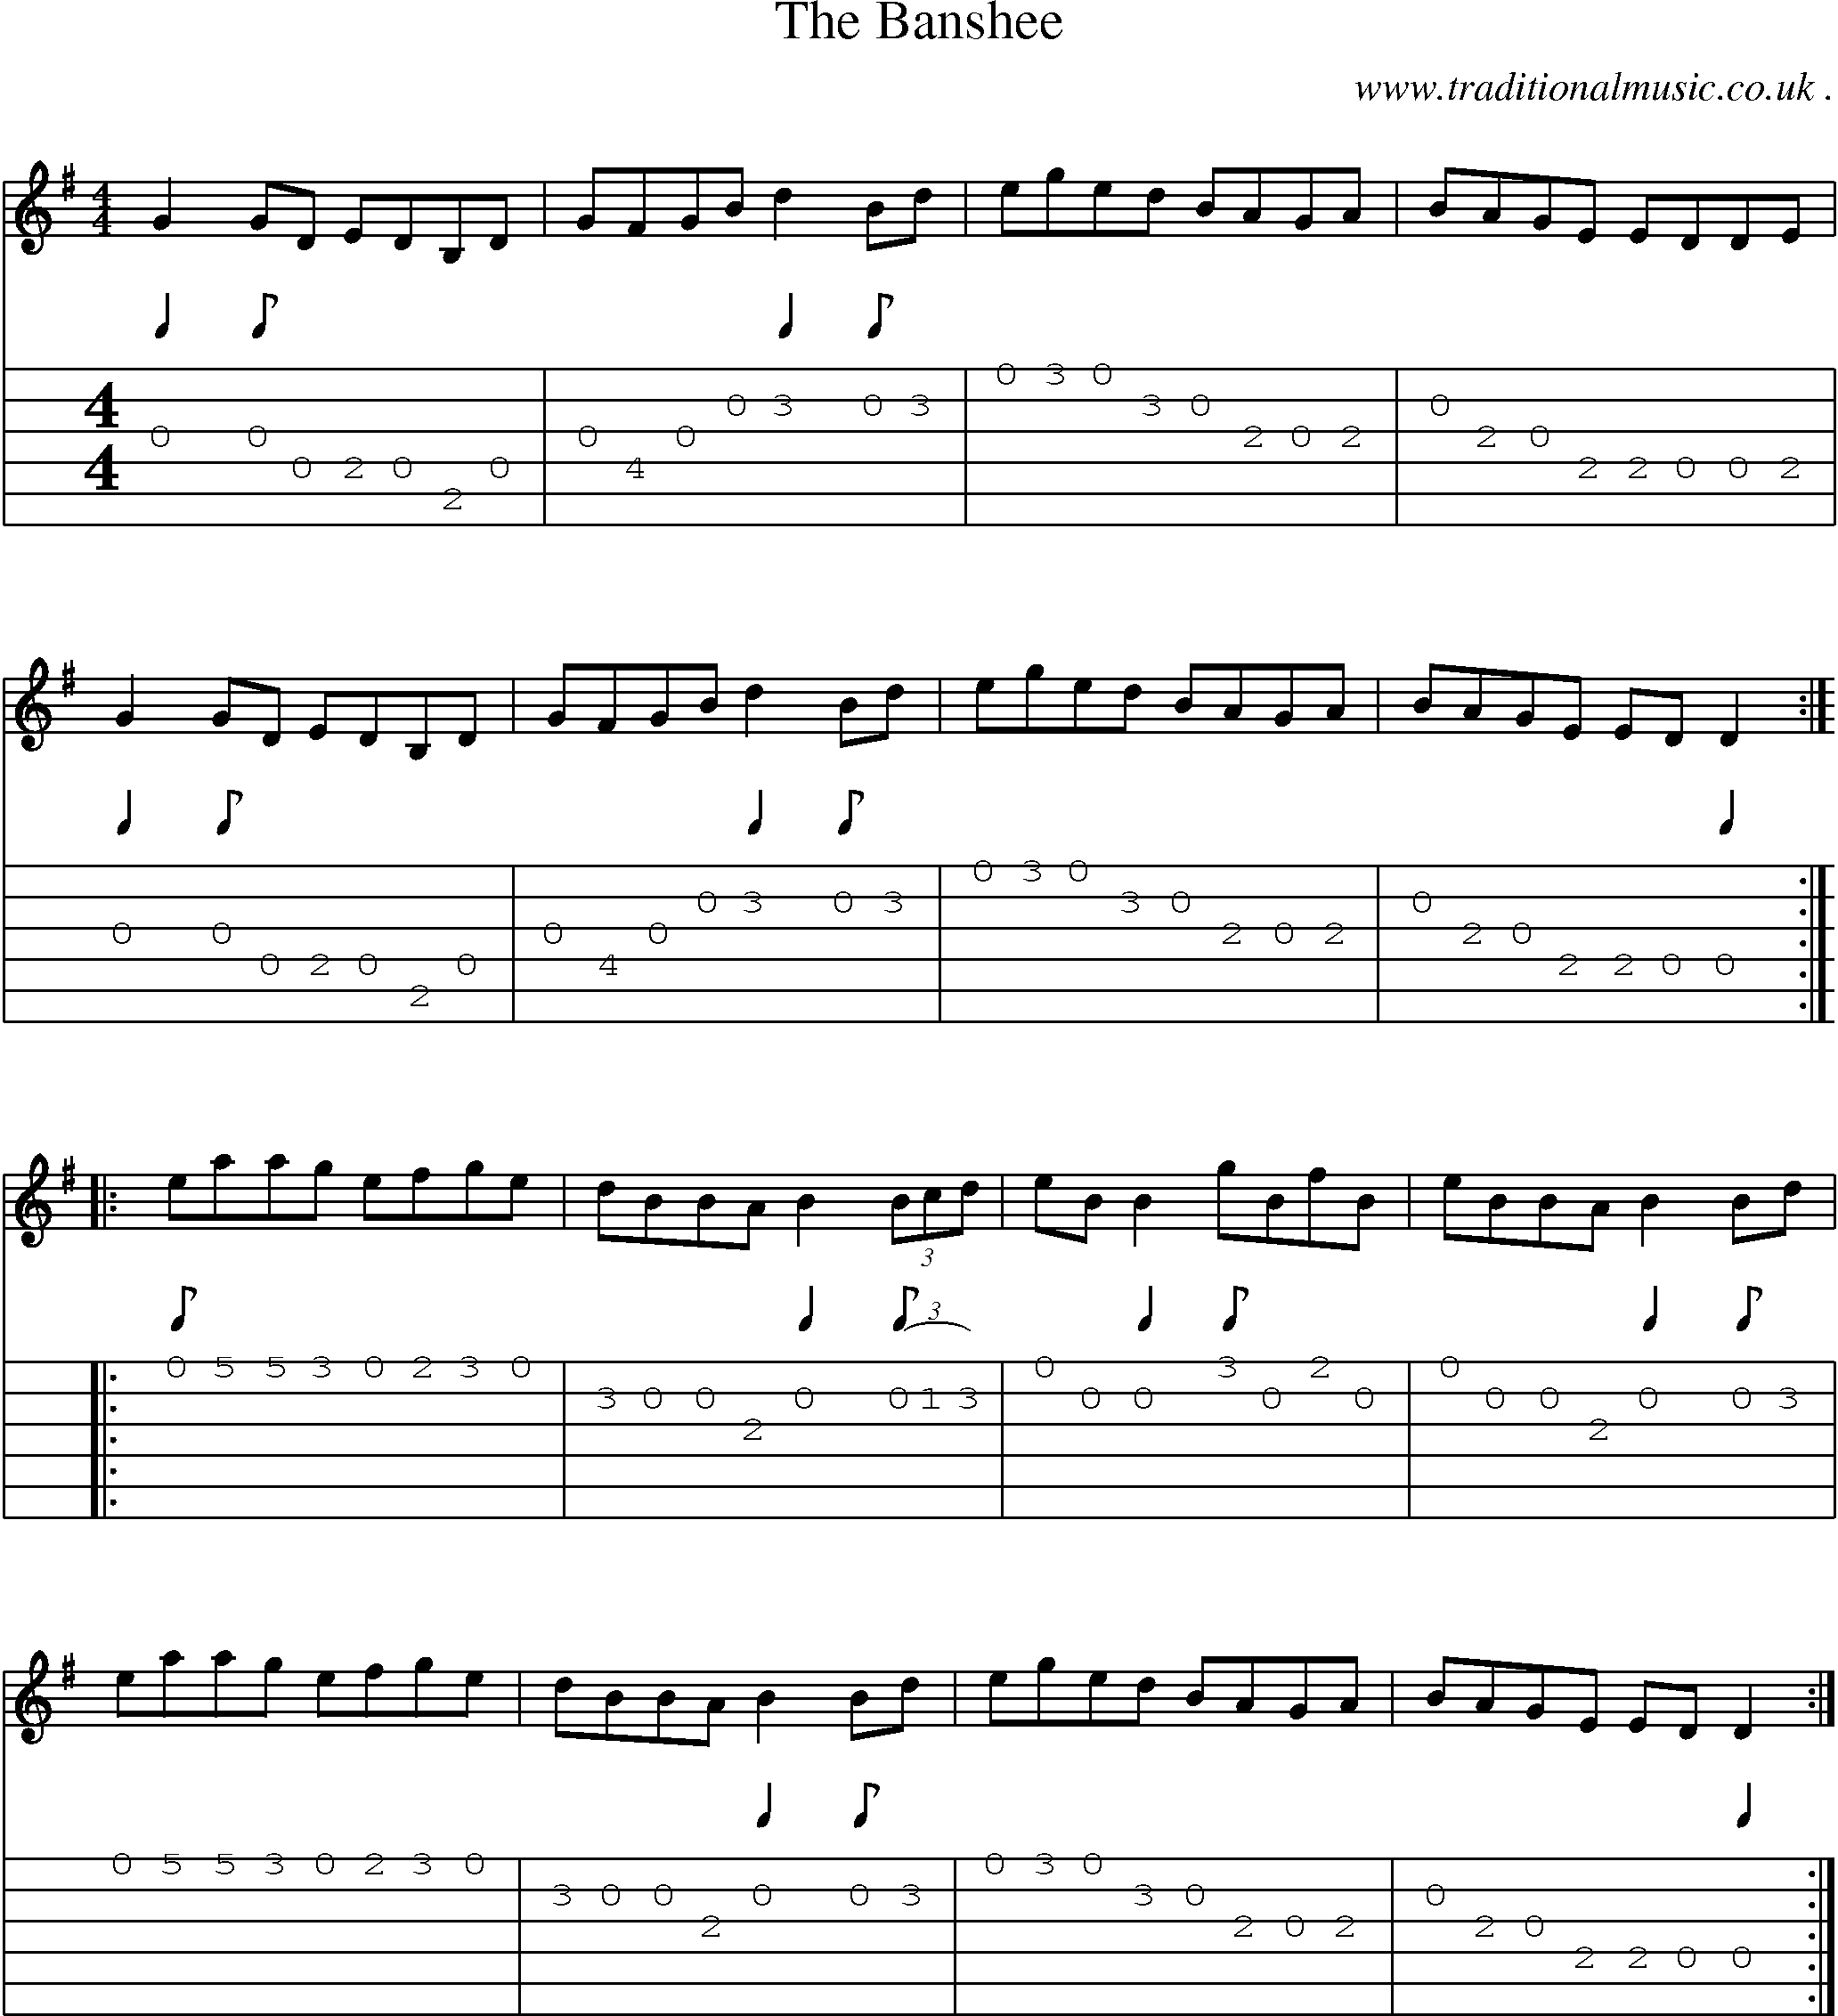 Sheet-Music and Guitar Tabs for The Banshee